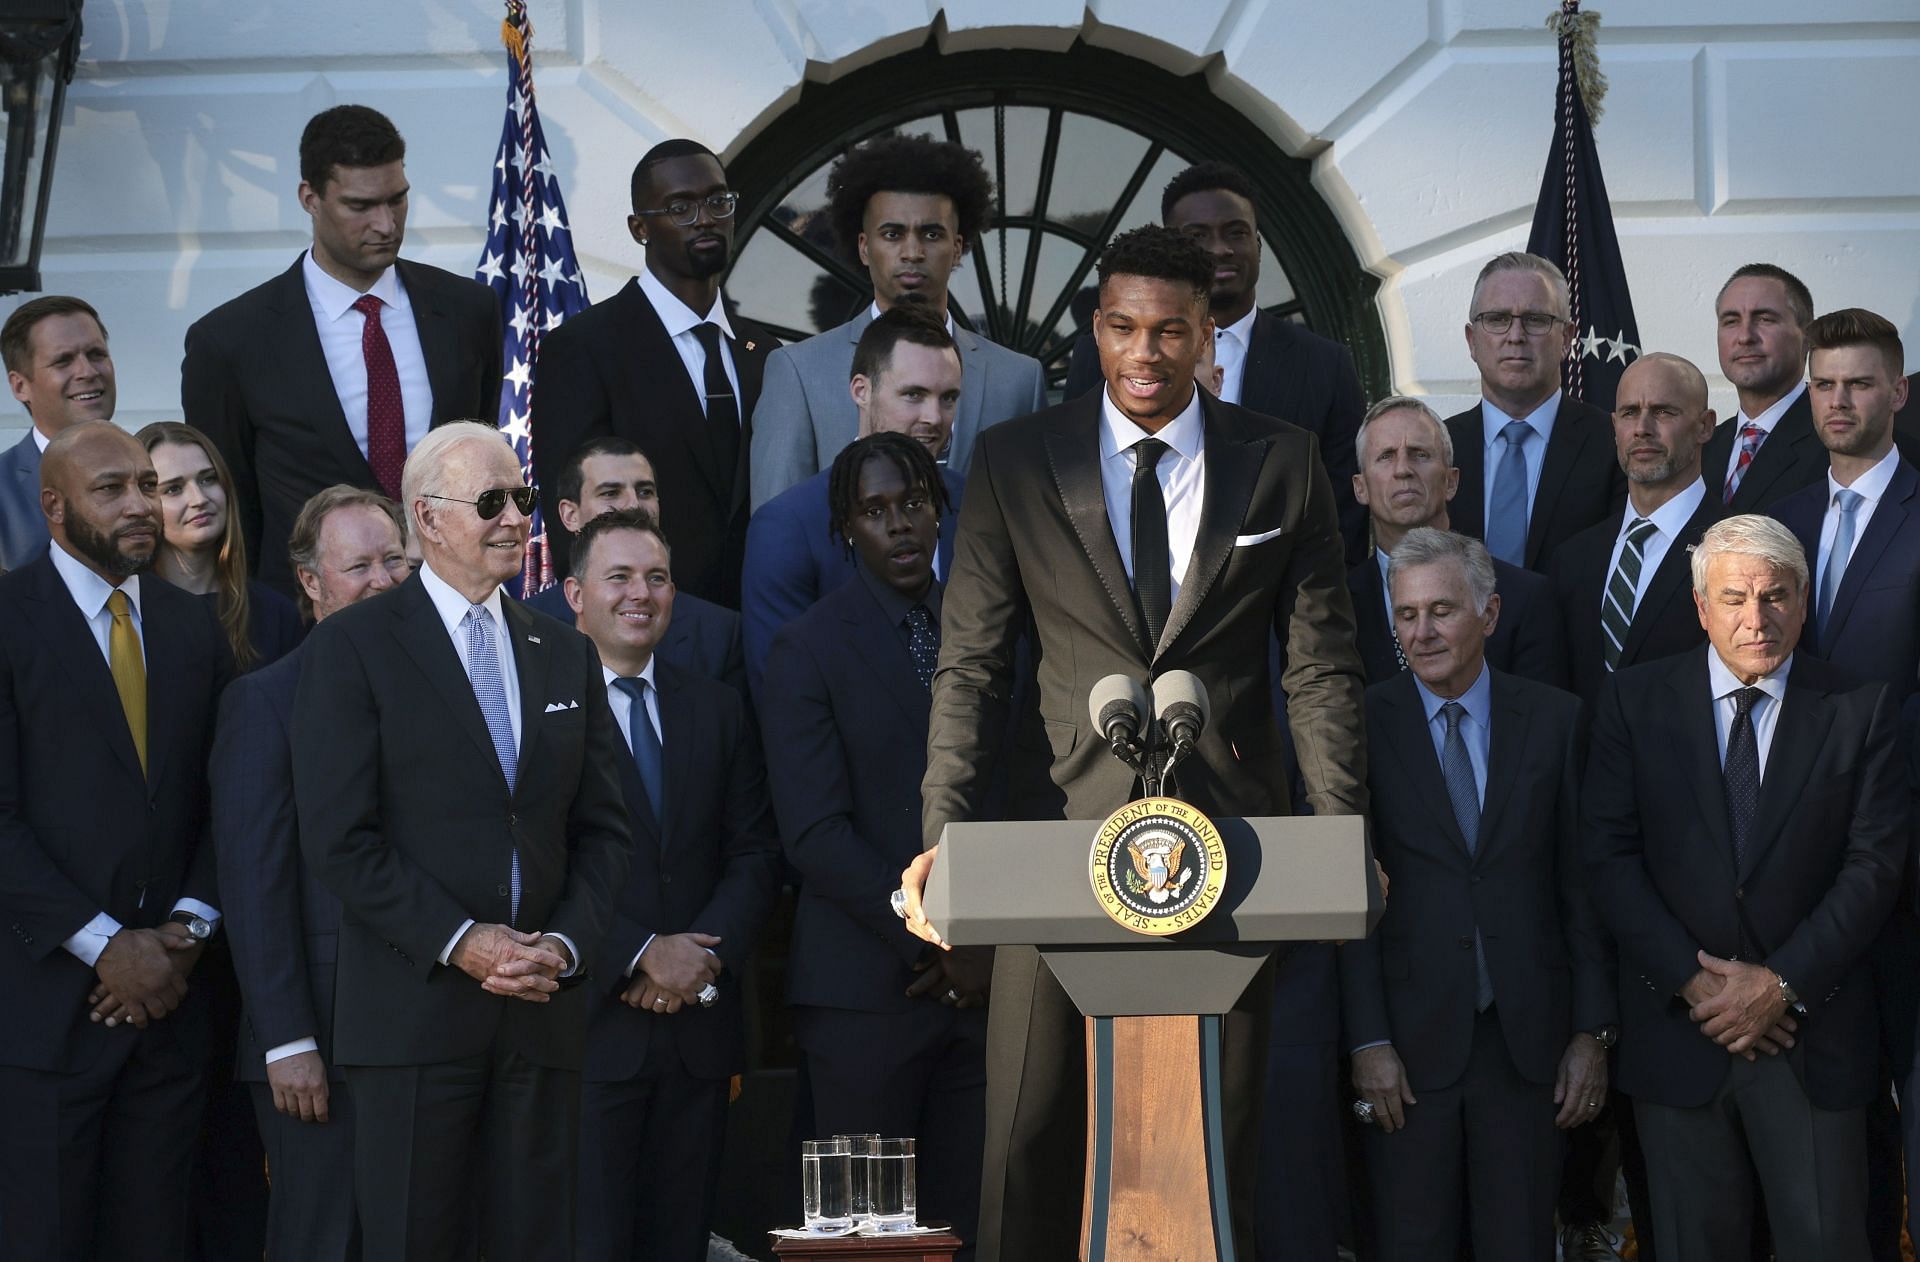 Giannis Antetokounmpo of the Milwaukee Bucks delivers remarks during an event where U.S. President Joe Biden honored the Bucks for winning the 2021 NBA Championship, on the South Lawn at the White House on November 08, 2021 in Washington, DC.